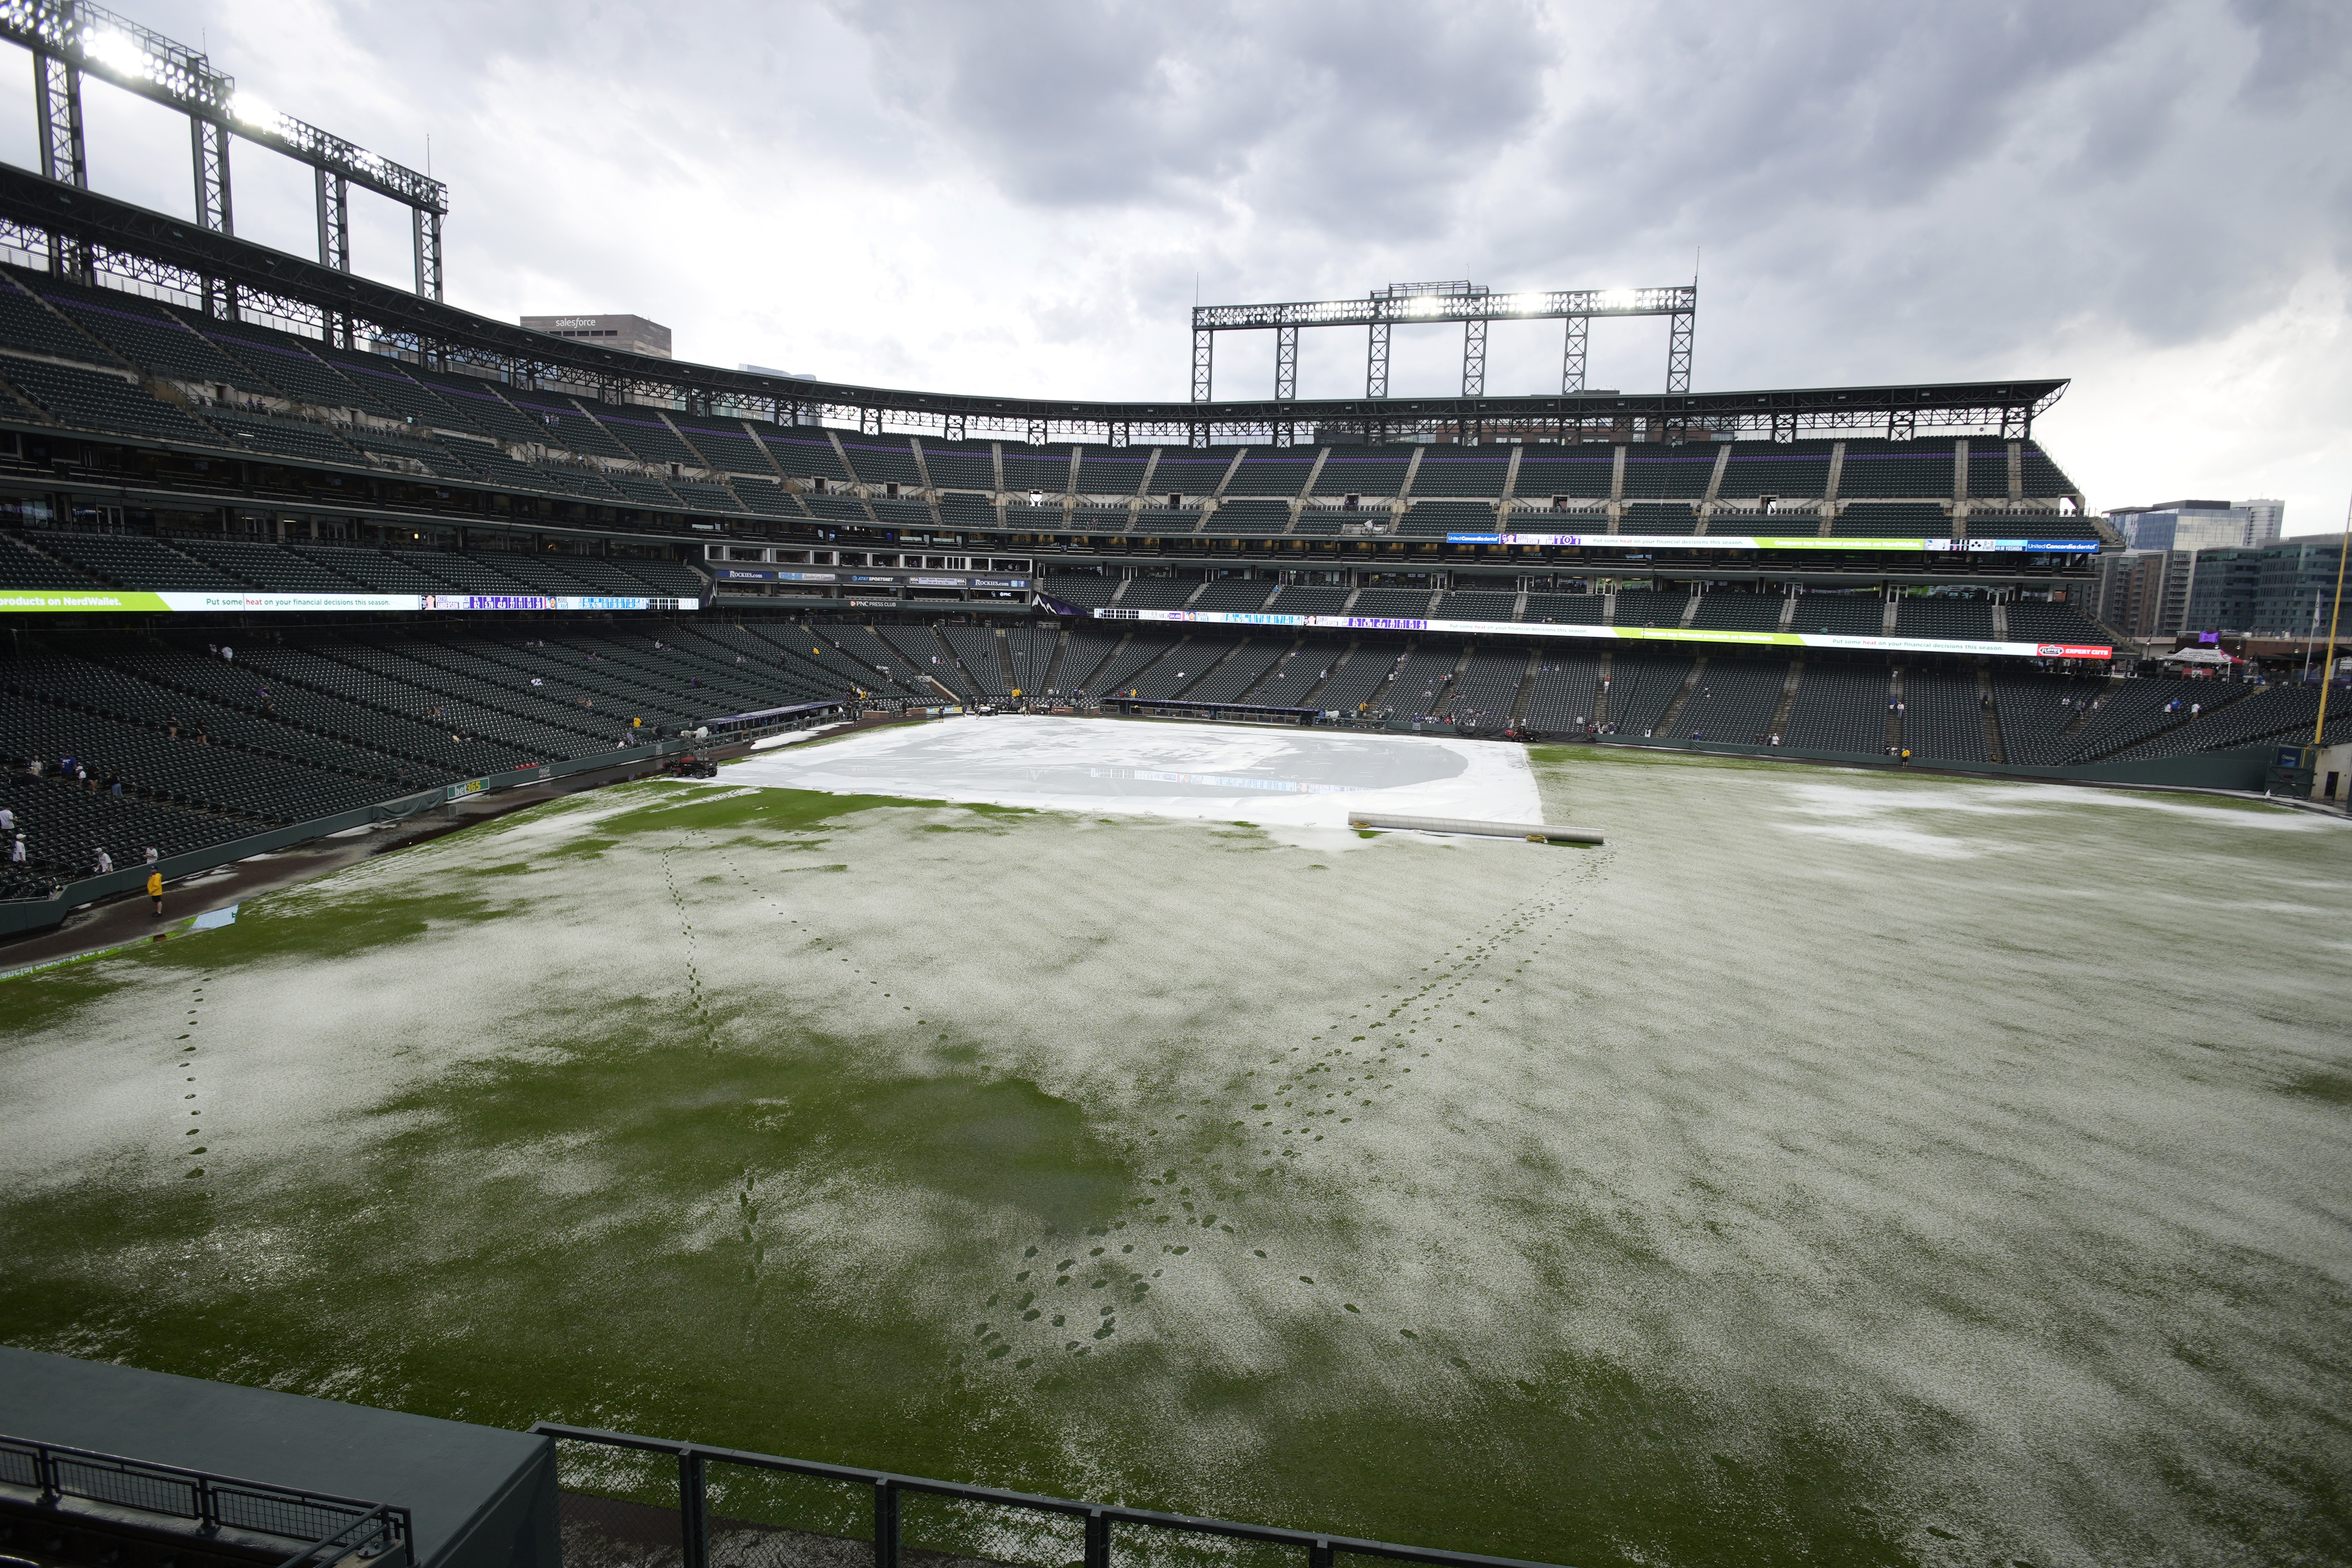 Snow at Baseball Stadiums - Coors Field Opening Day Snow